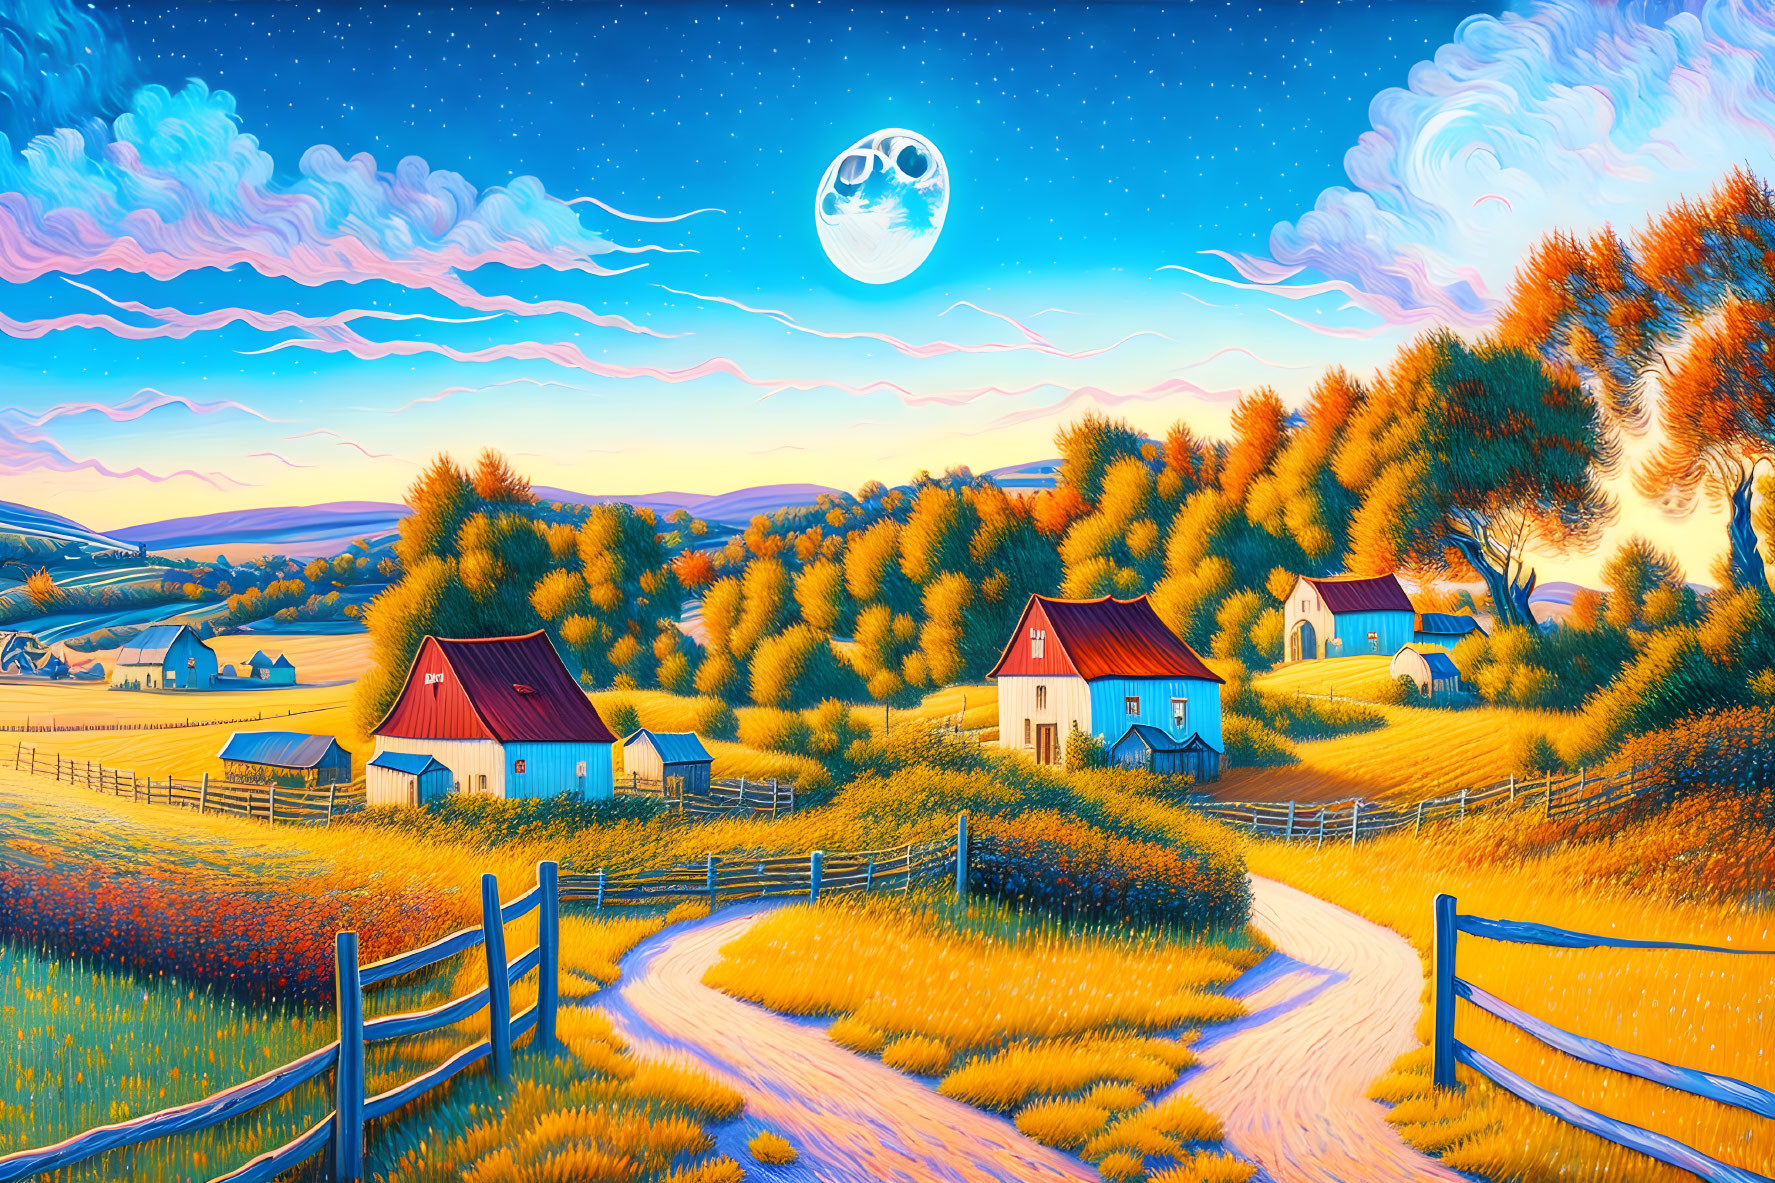 Vibrant rural landscape at twilight with full moon, winding path, cottages, hills, autumn